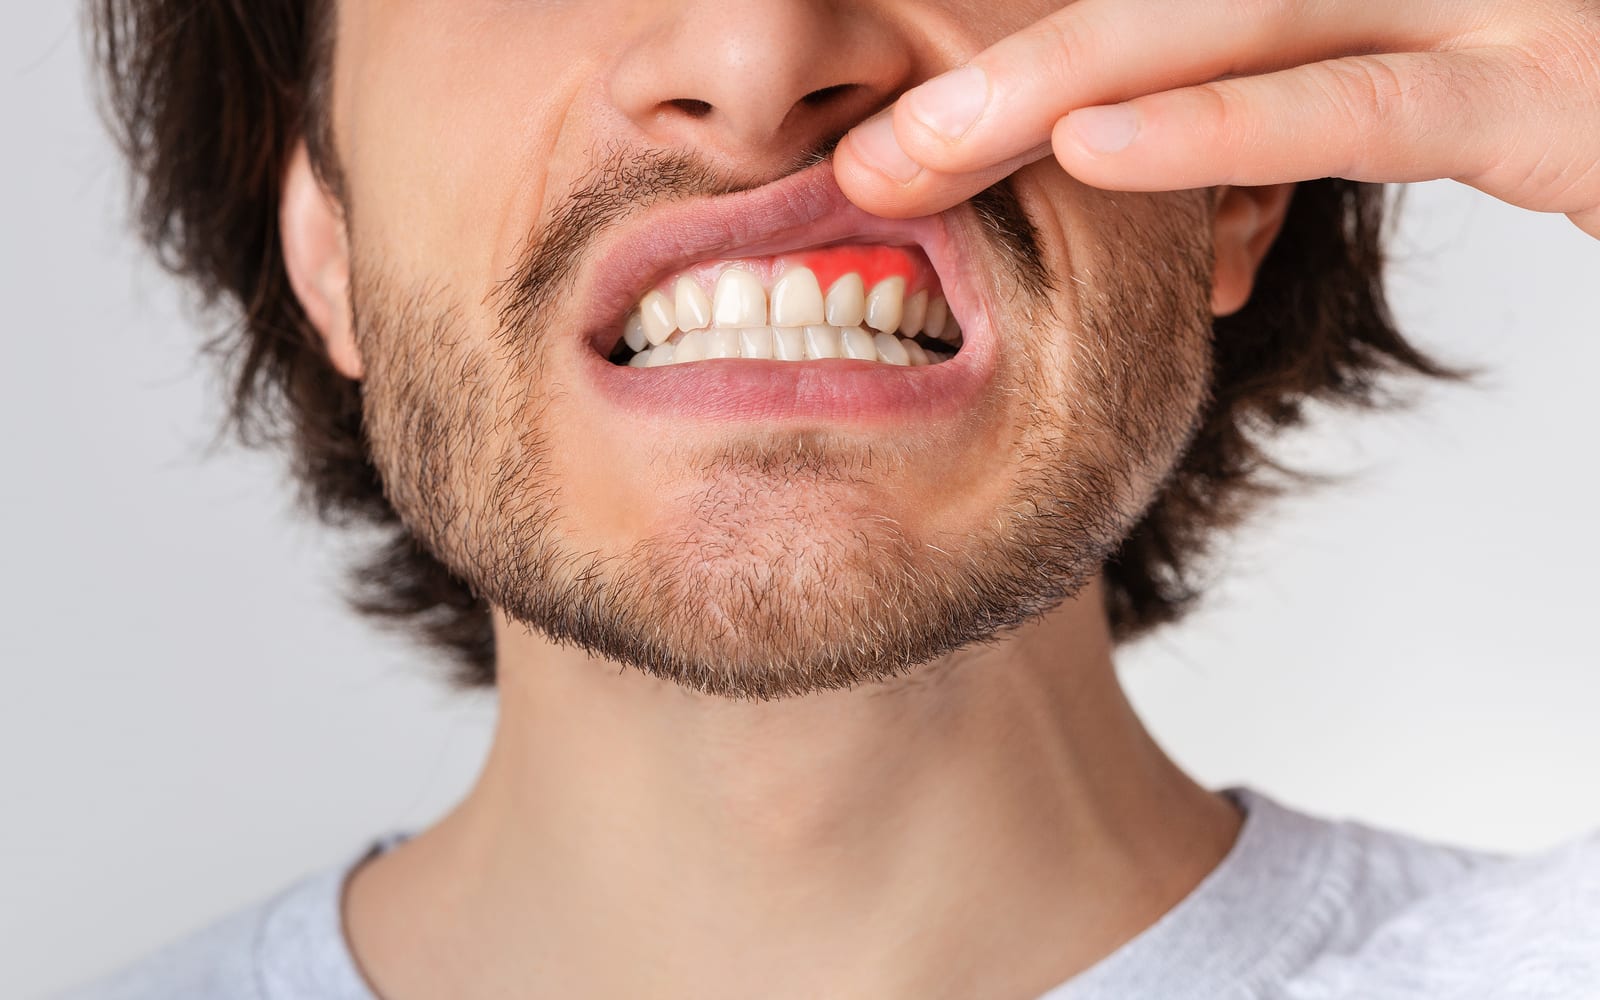 Man pulling up a lip to reveal gingivitis